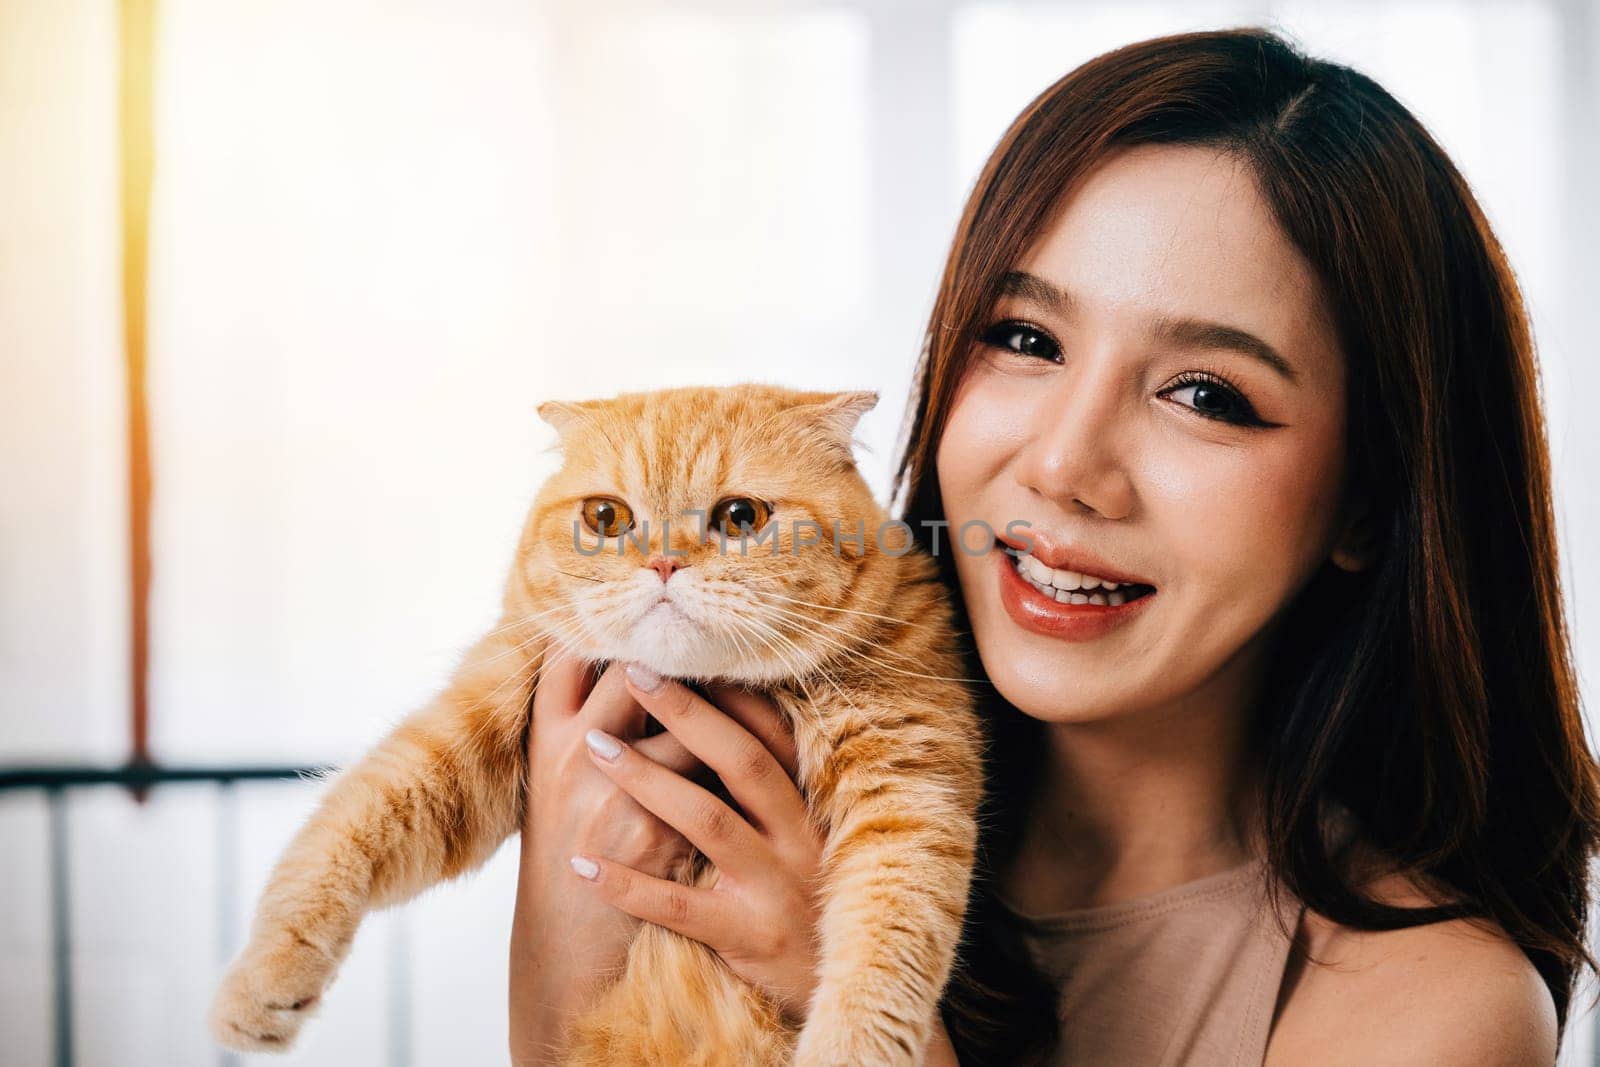 This close-up shot portrays a woman and her charming orange Scottish Fold cat, highlighting the warmth and companionship they enjoy in the comfort of their home. by Sorapop